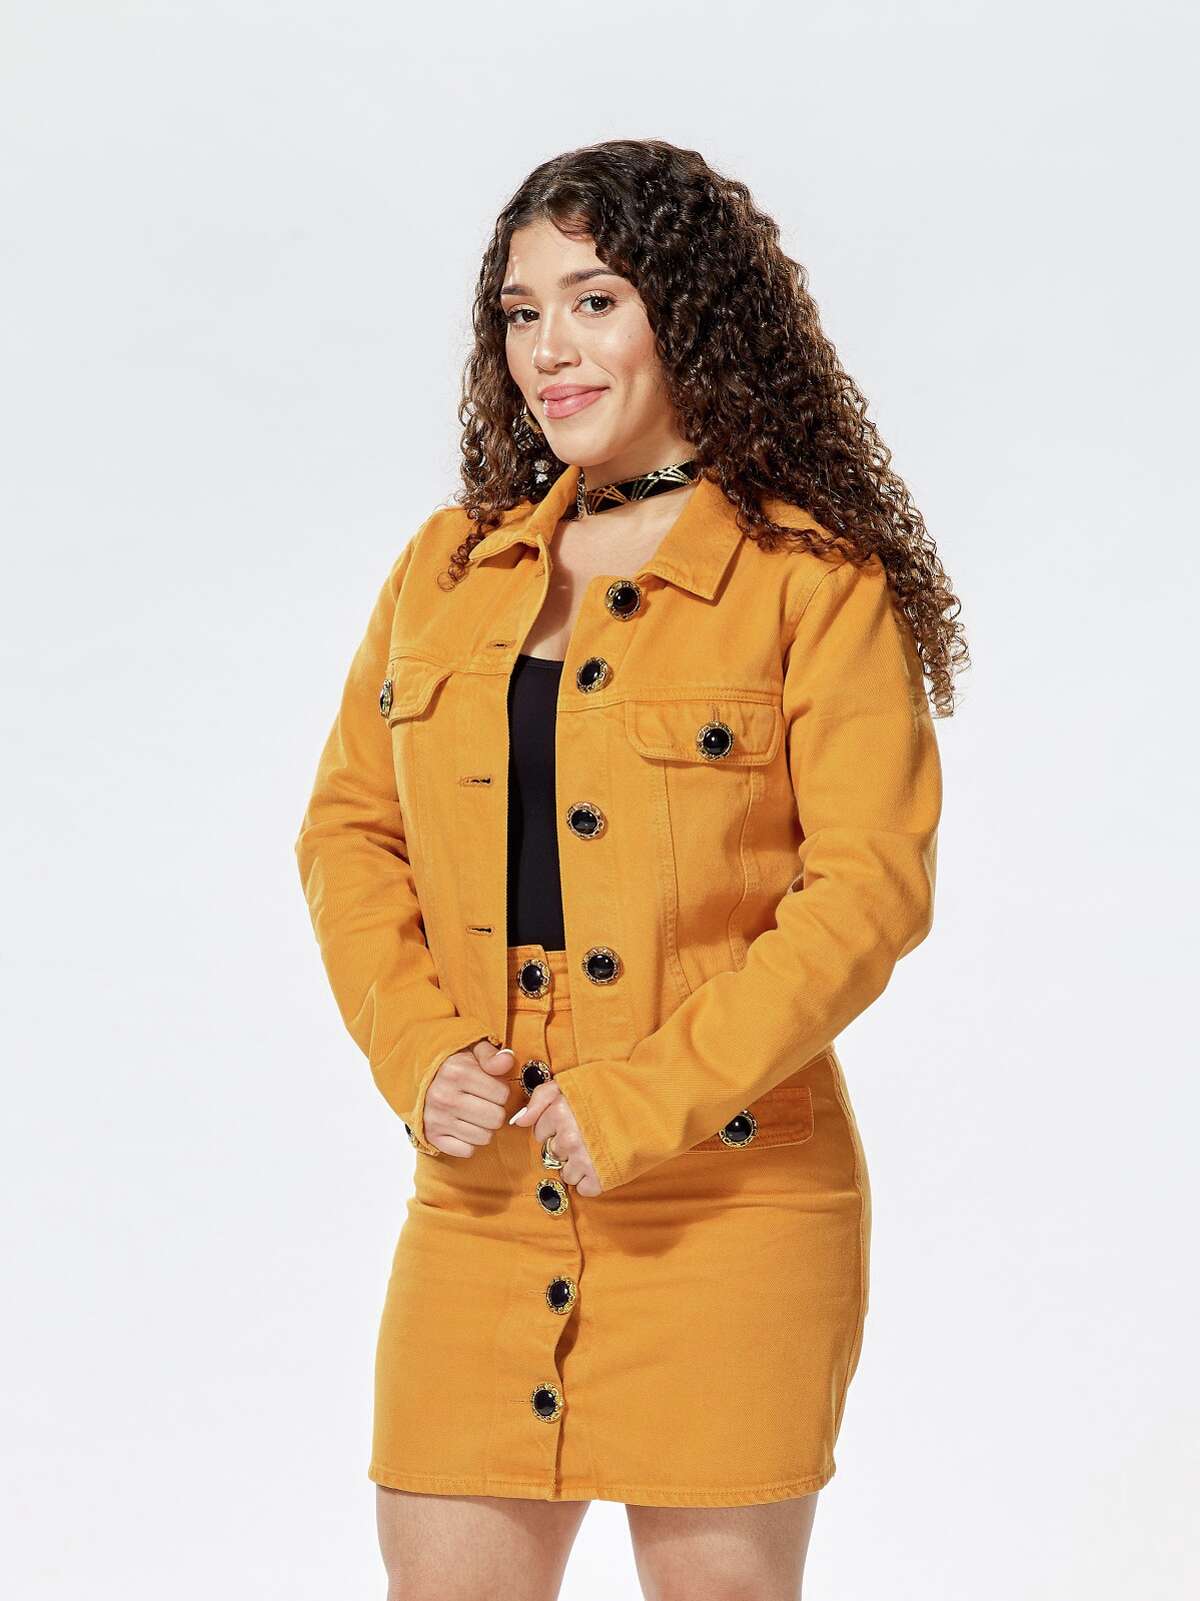 Mandi Castillo, 23, advanced to the next round on "The Voice" after winning her battle round this week on the NBC singing competition.